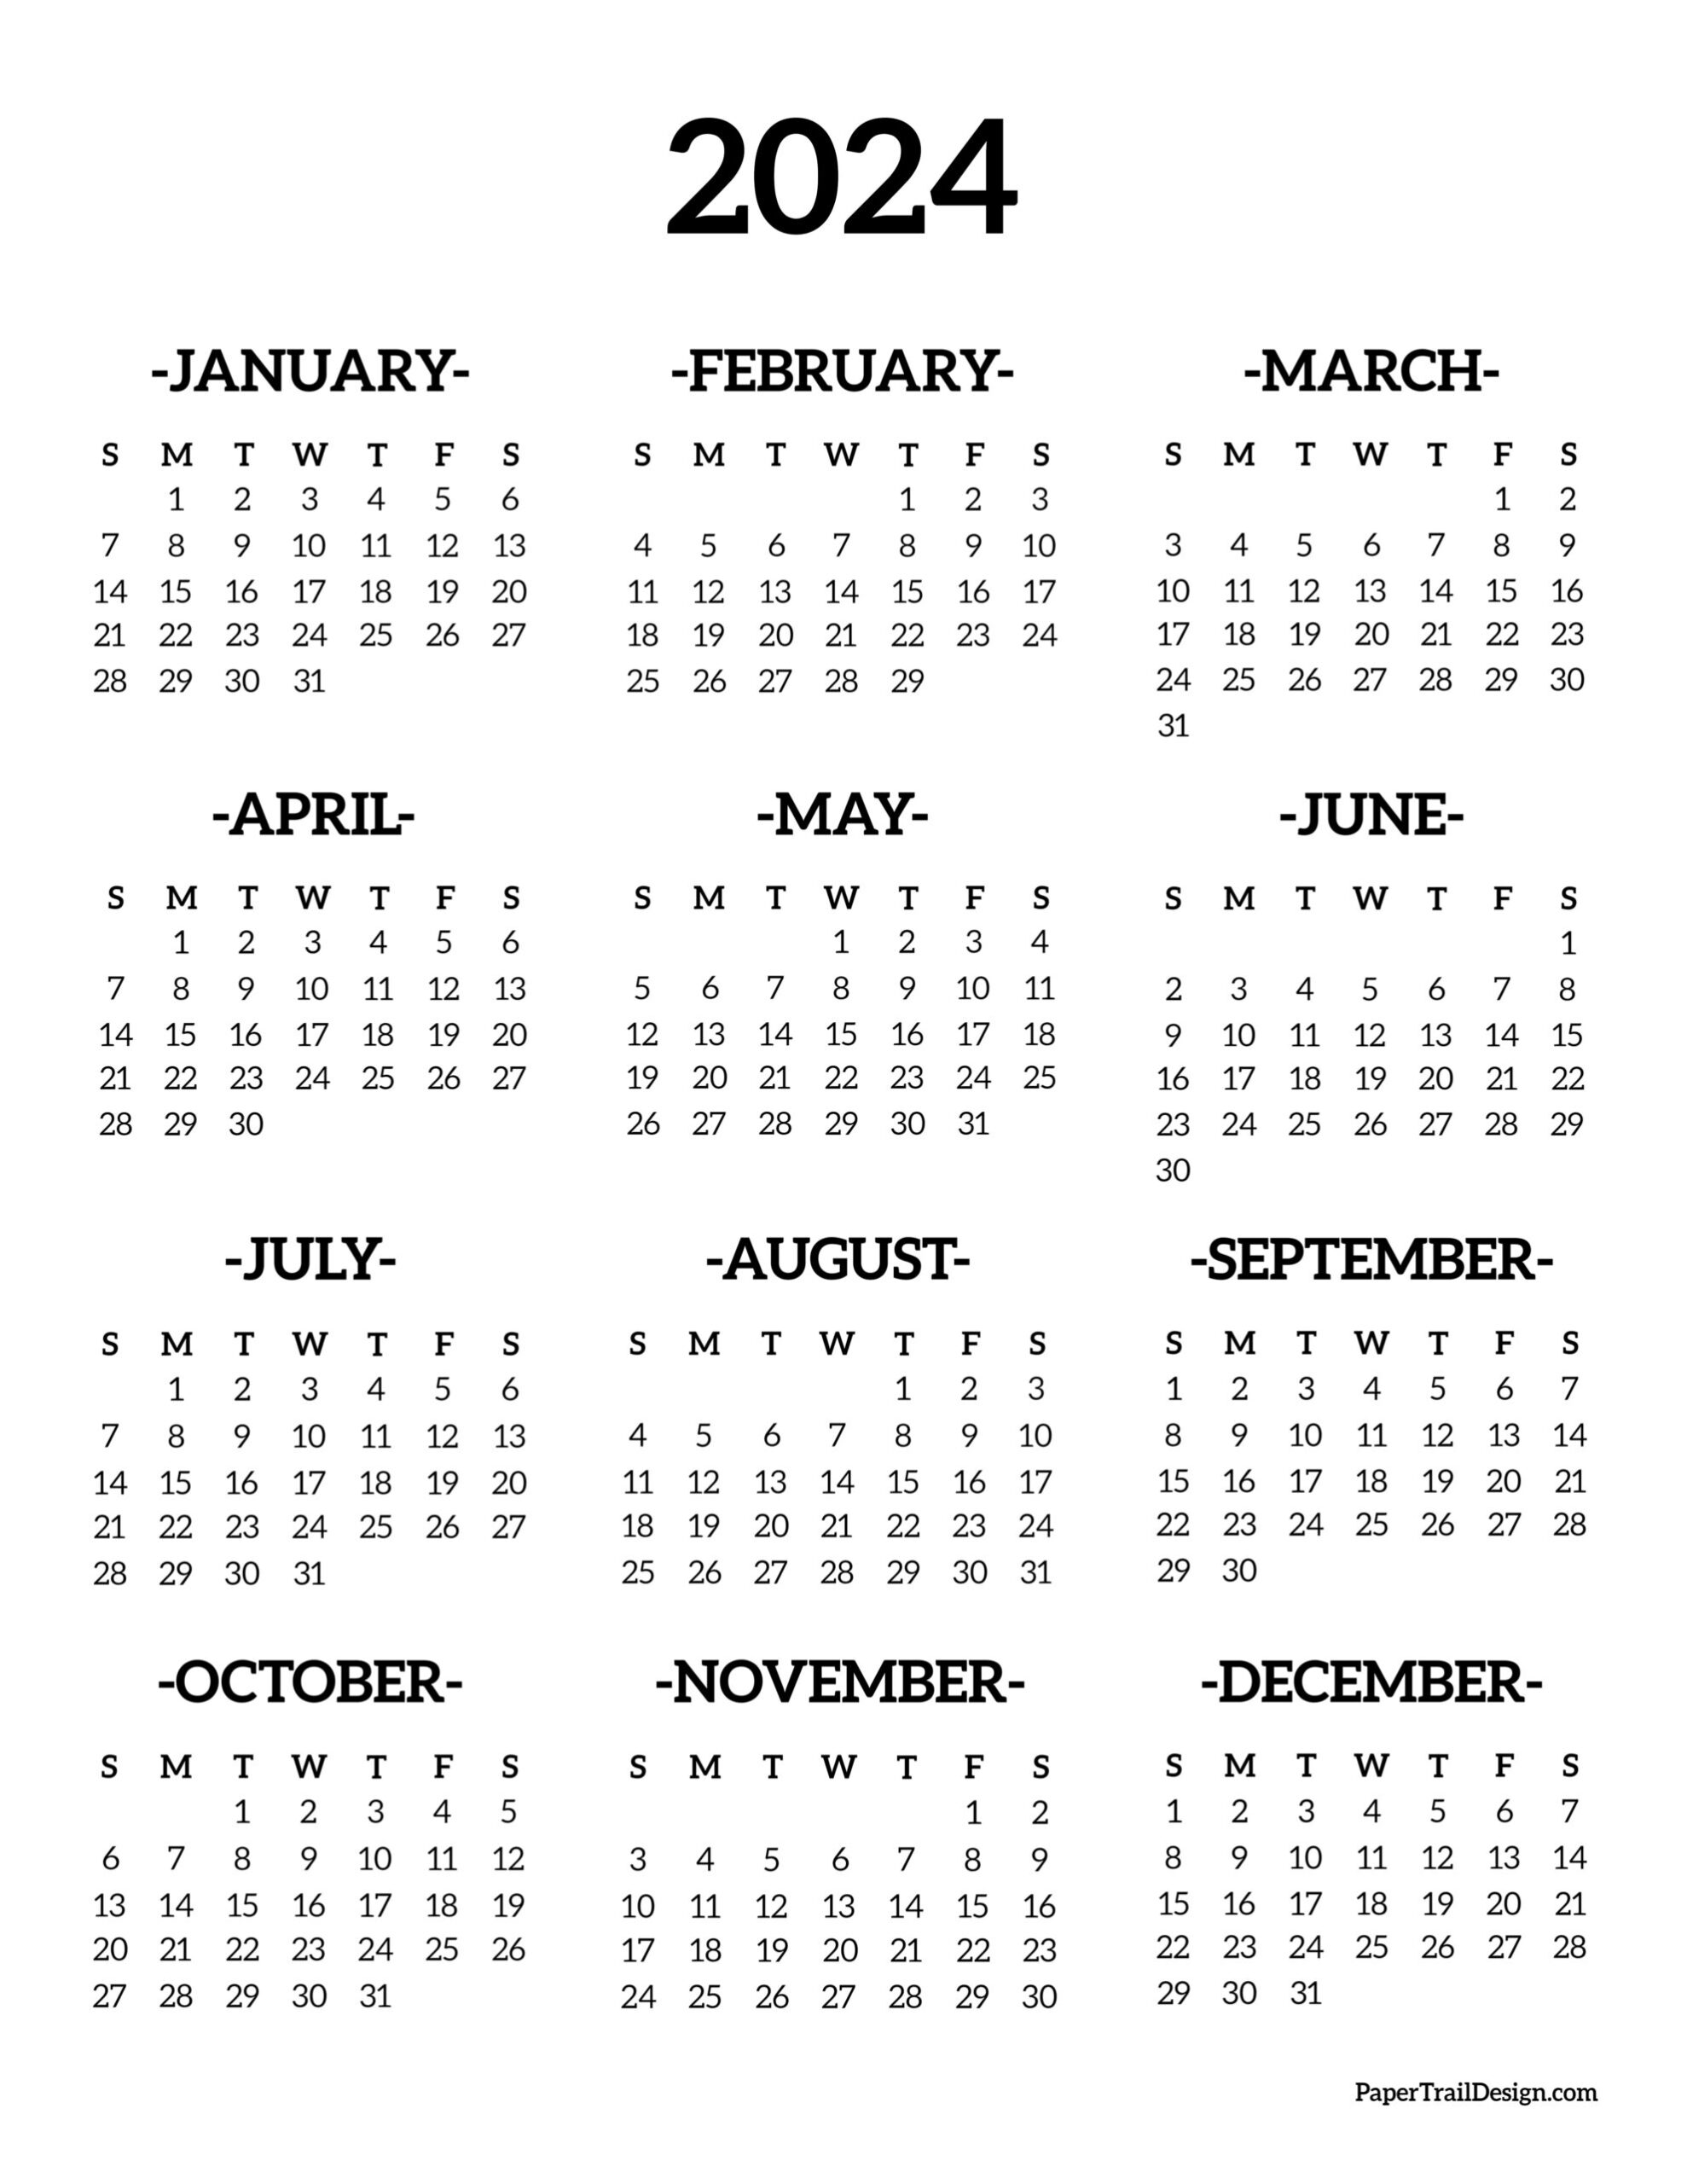 Calendar 2024 Printable One Page - Paper Trail Design for 2024 Calendar Free Printable One Page